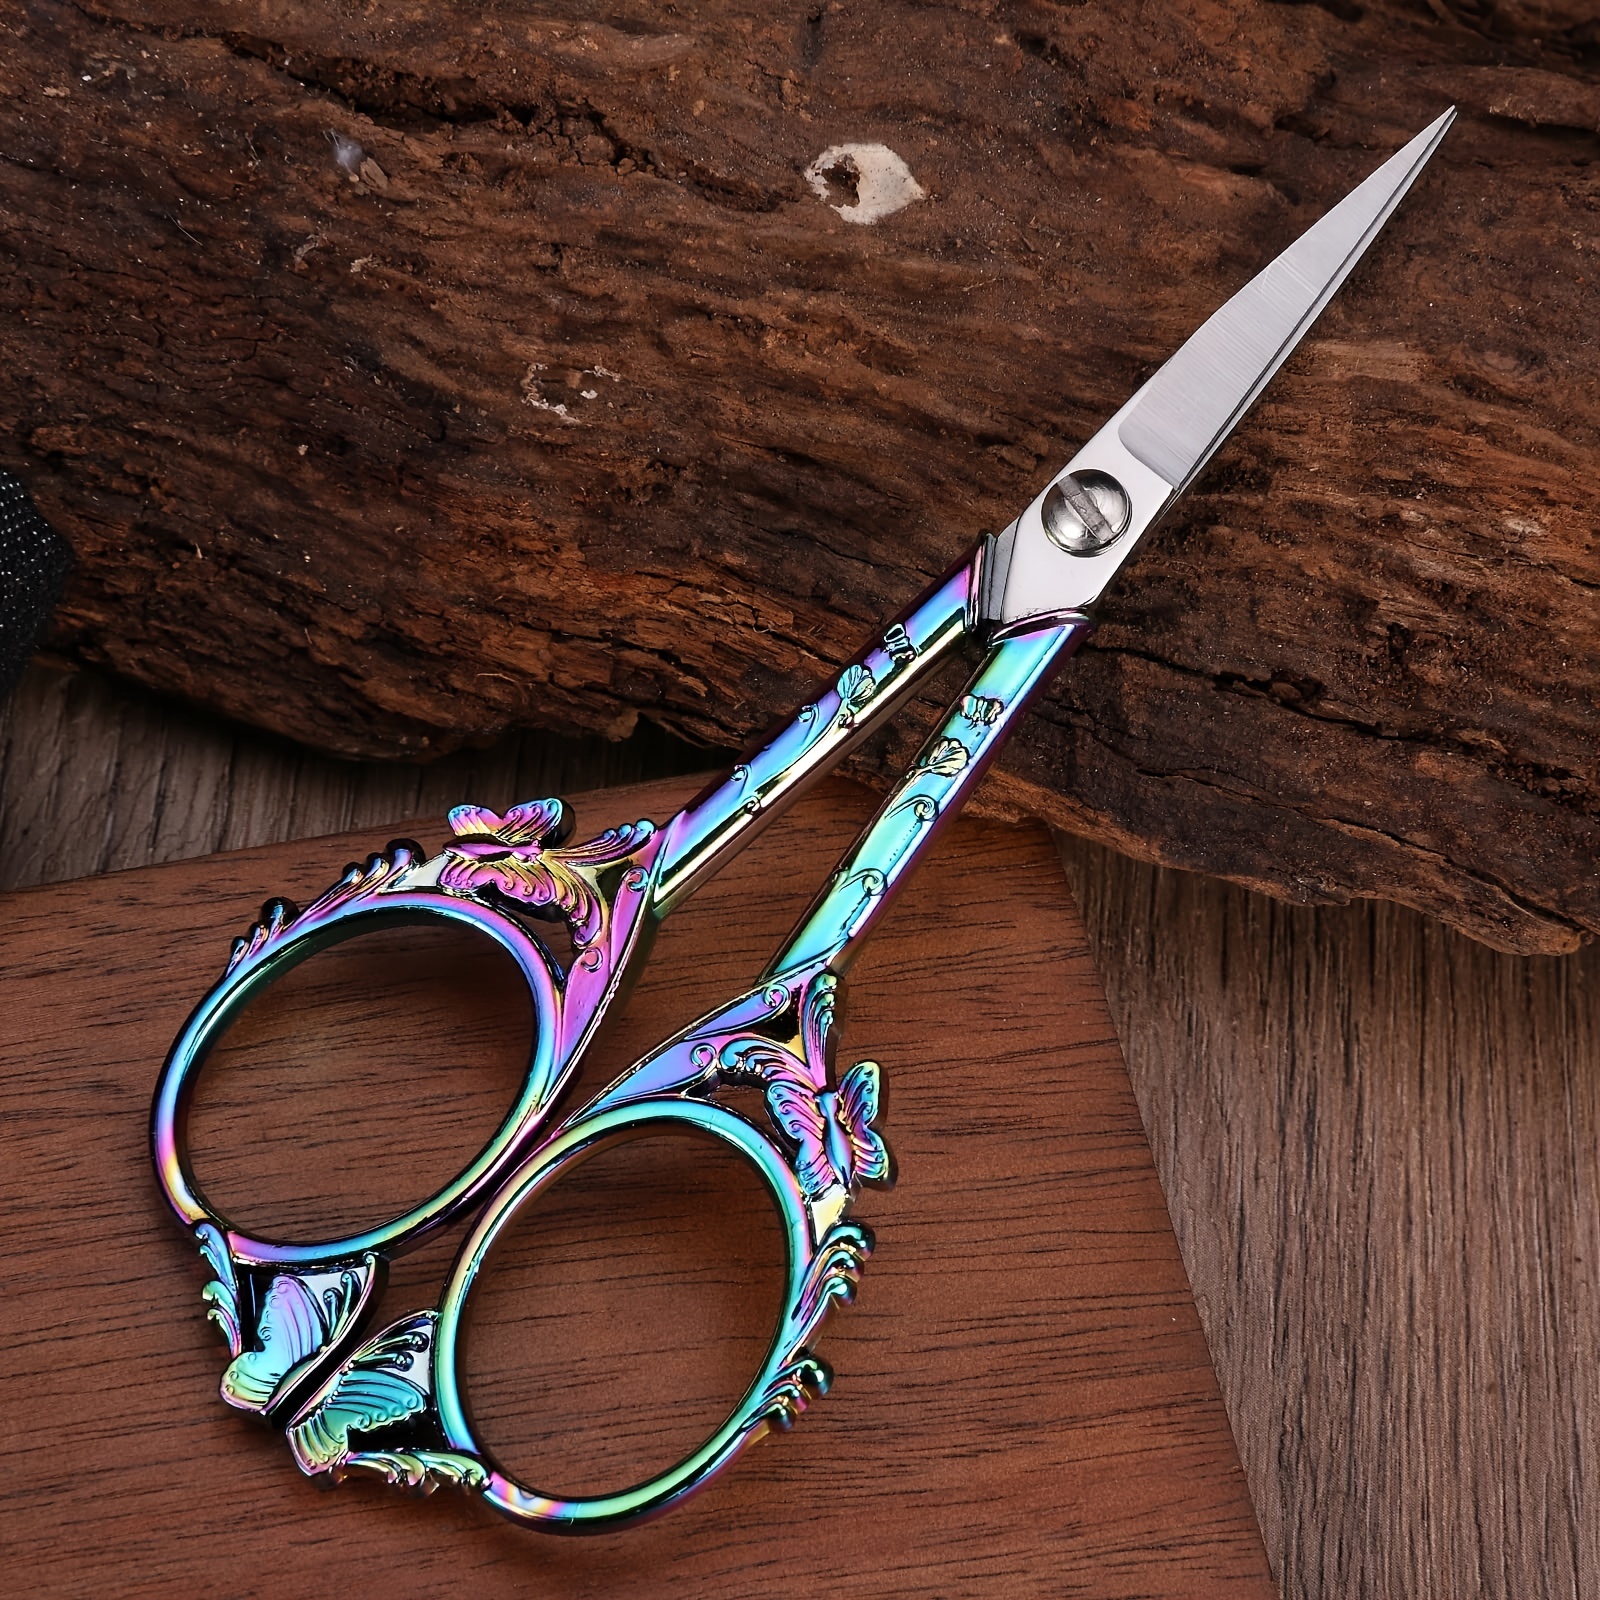 Kleiber Mini/fine Embroidery Scissors Very Sharp 9cm / 3.5 Sewing Crafts  Small With Case 